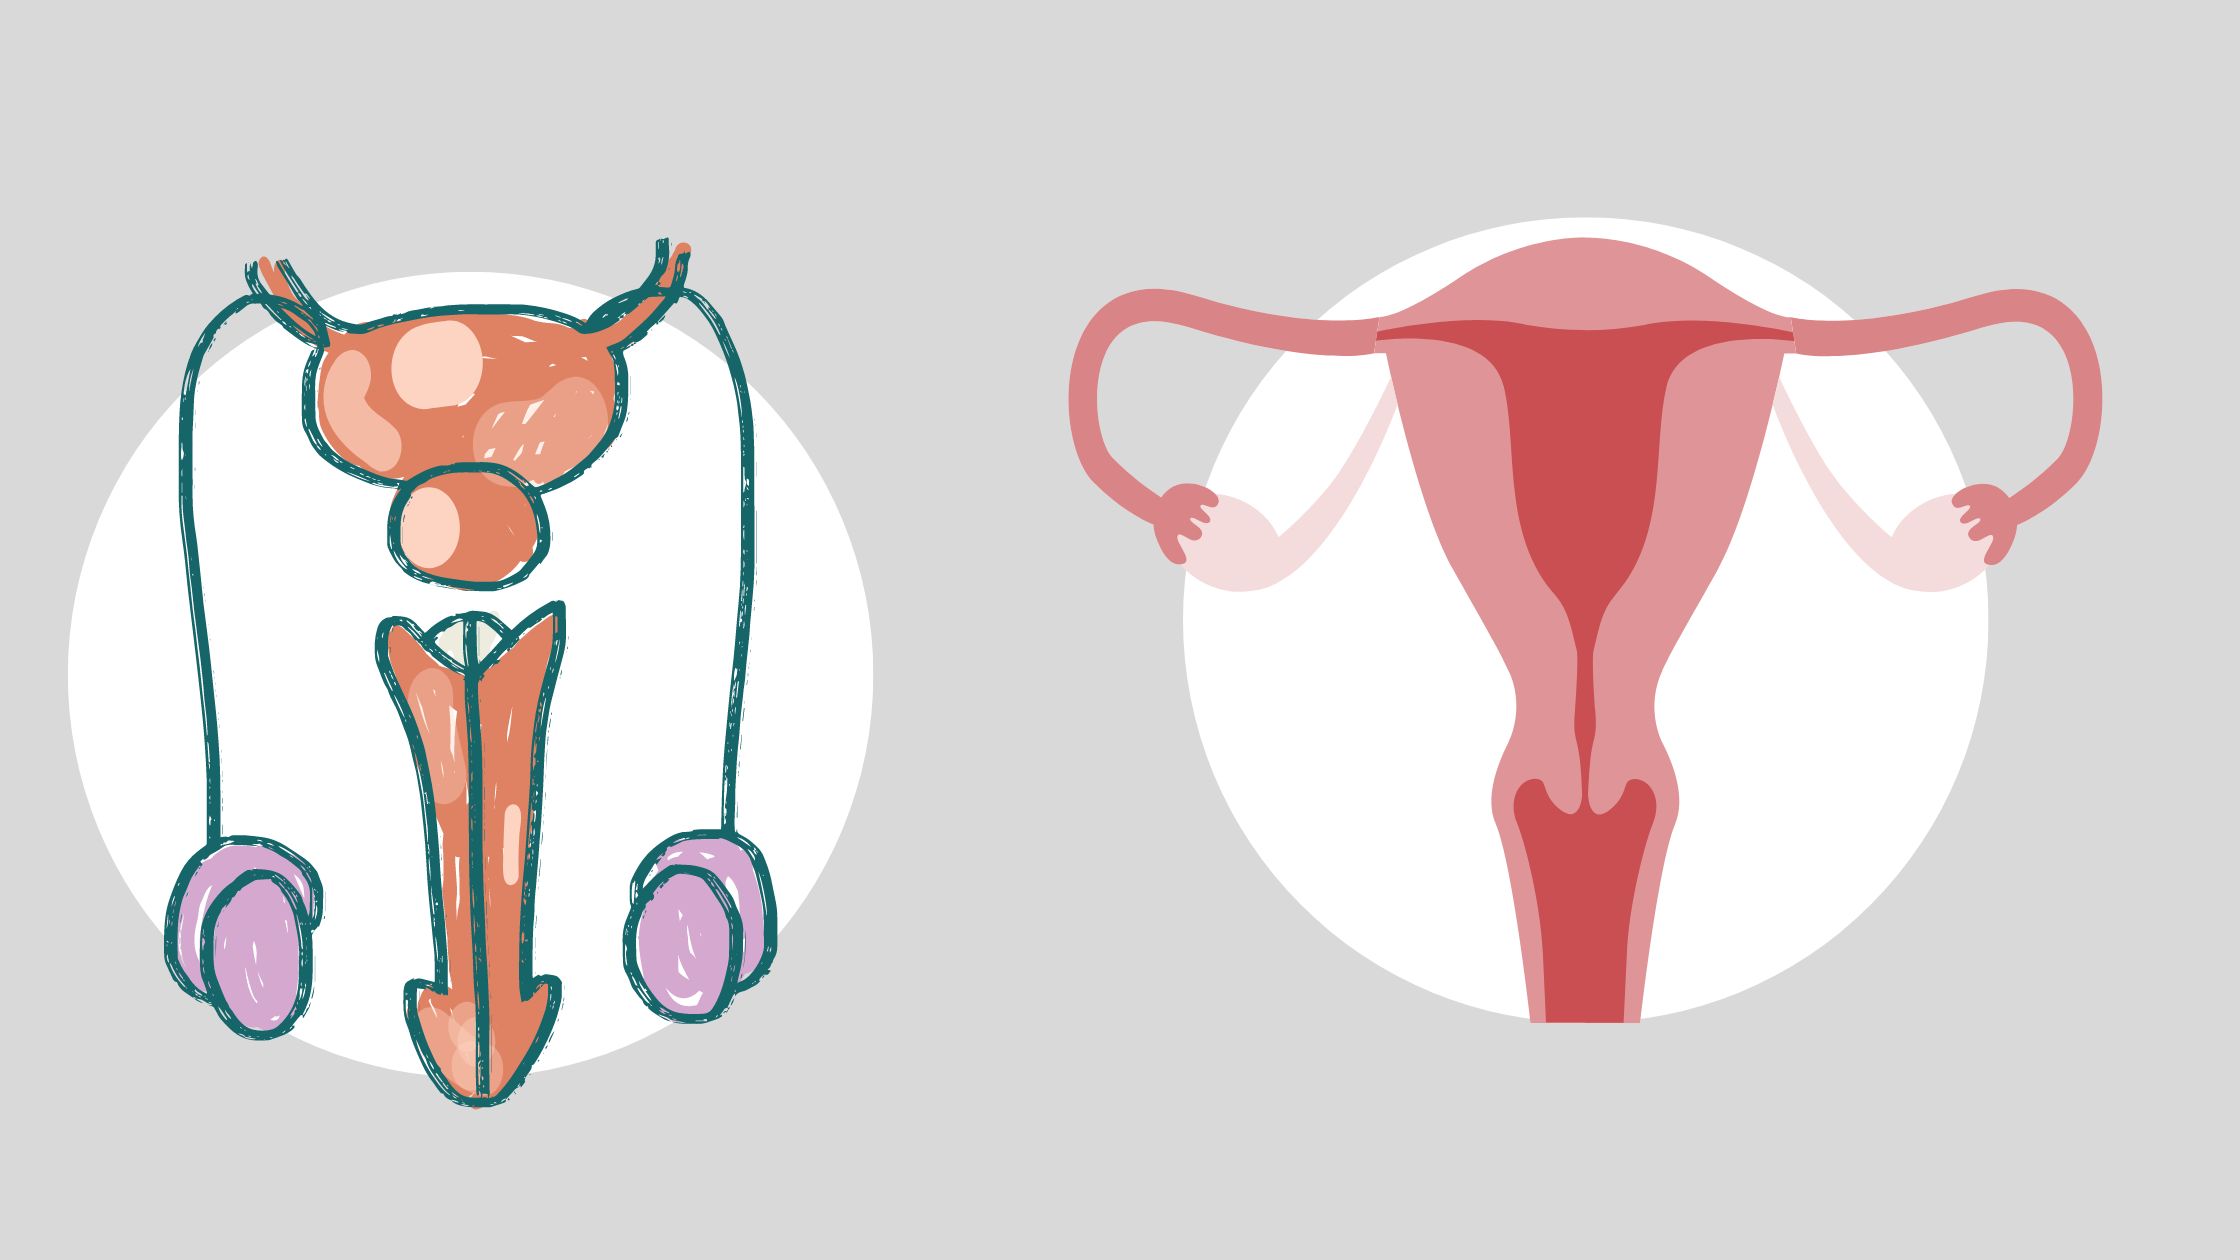 Reproductive System - Development and Differentiation